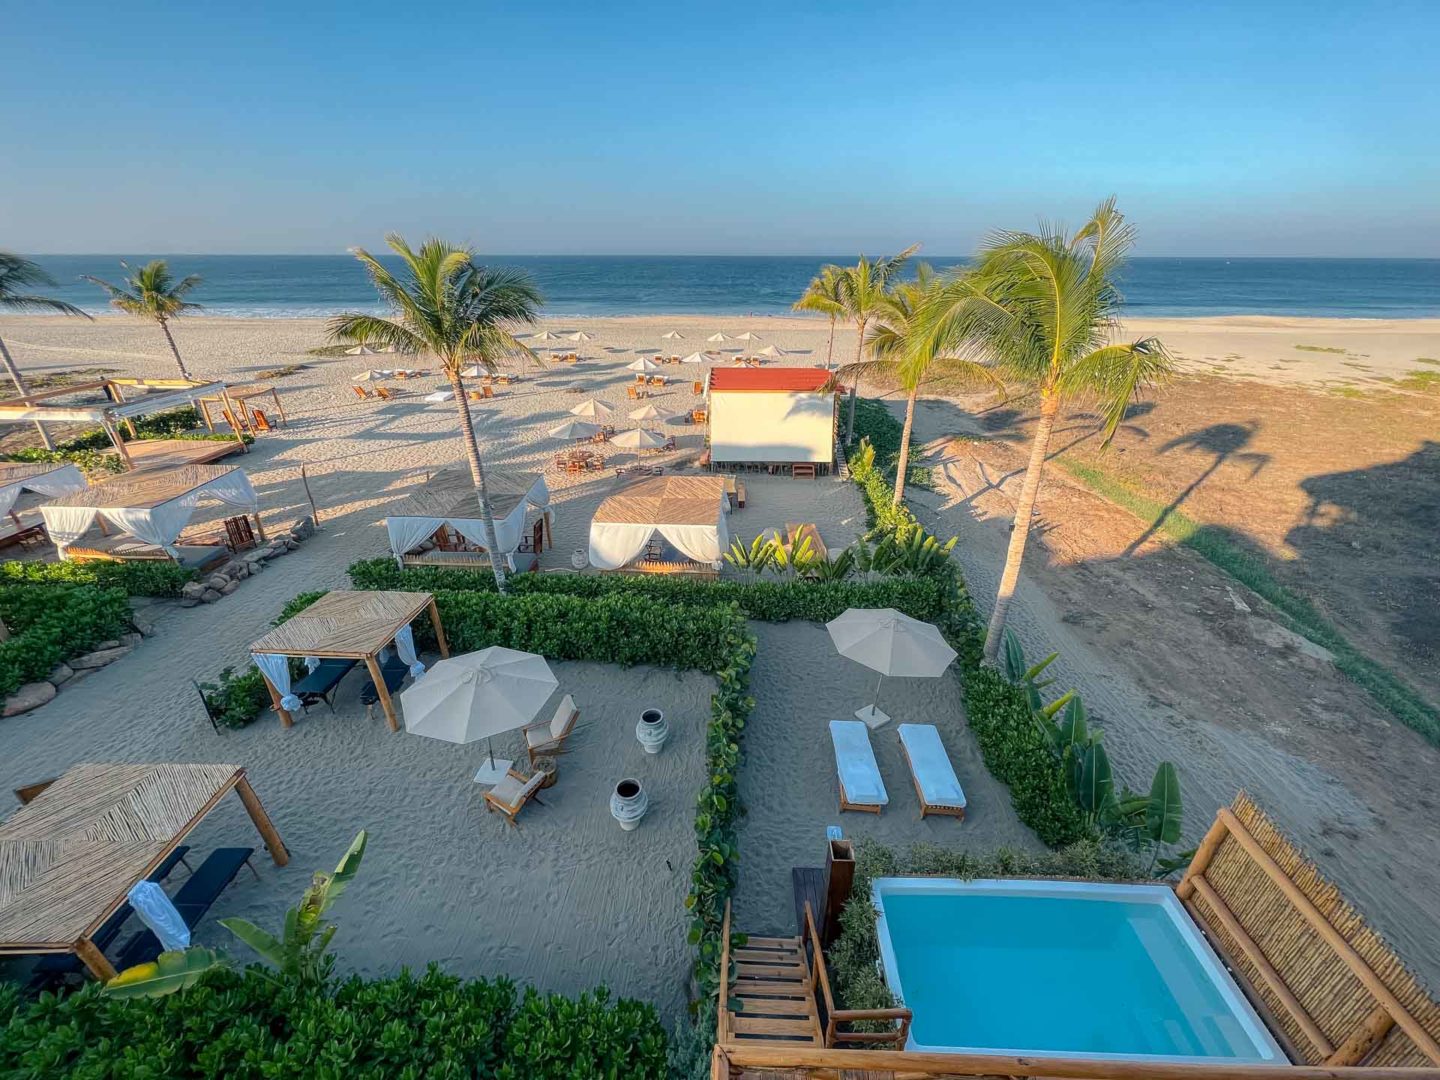 where to stay in puerto escondido, hotels in puerto escondido, puerto escondido hotels, puerto escondido resorts, places to stay in puerto escondido